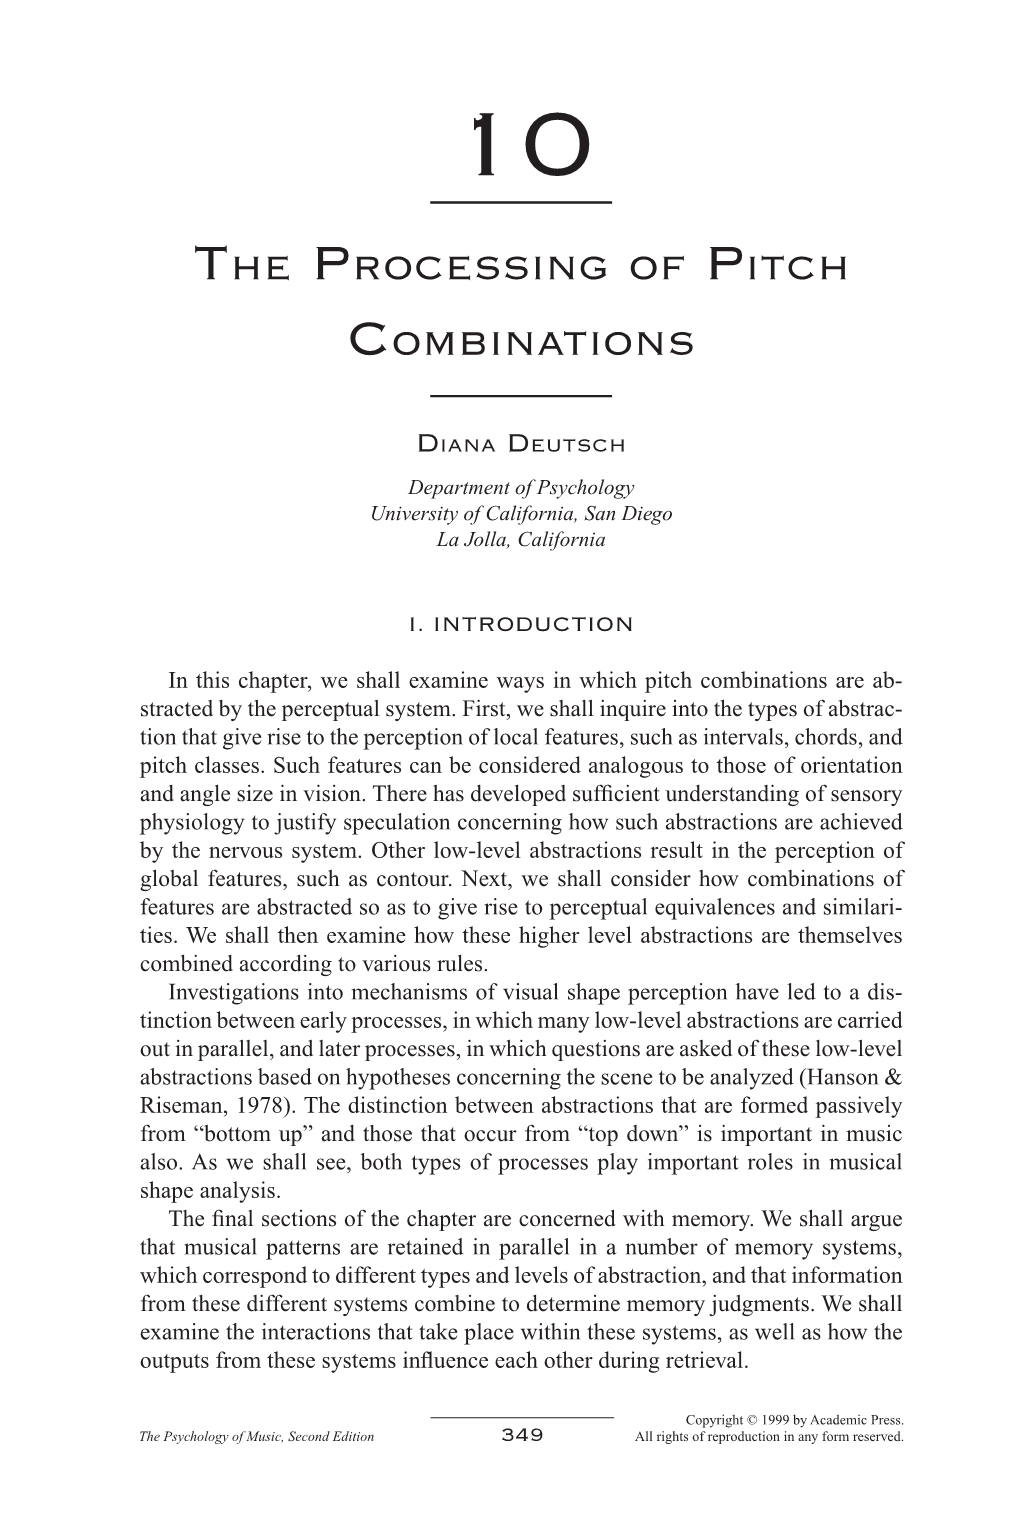 The Processing of Pitch Combinations